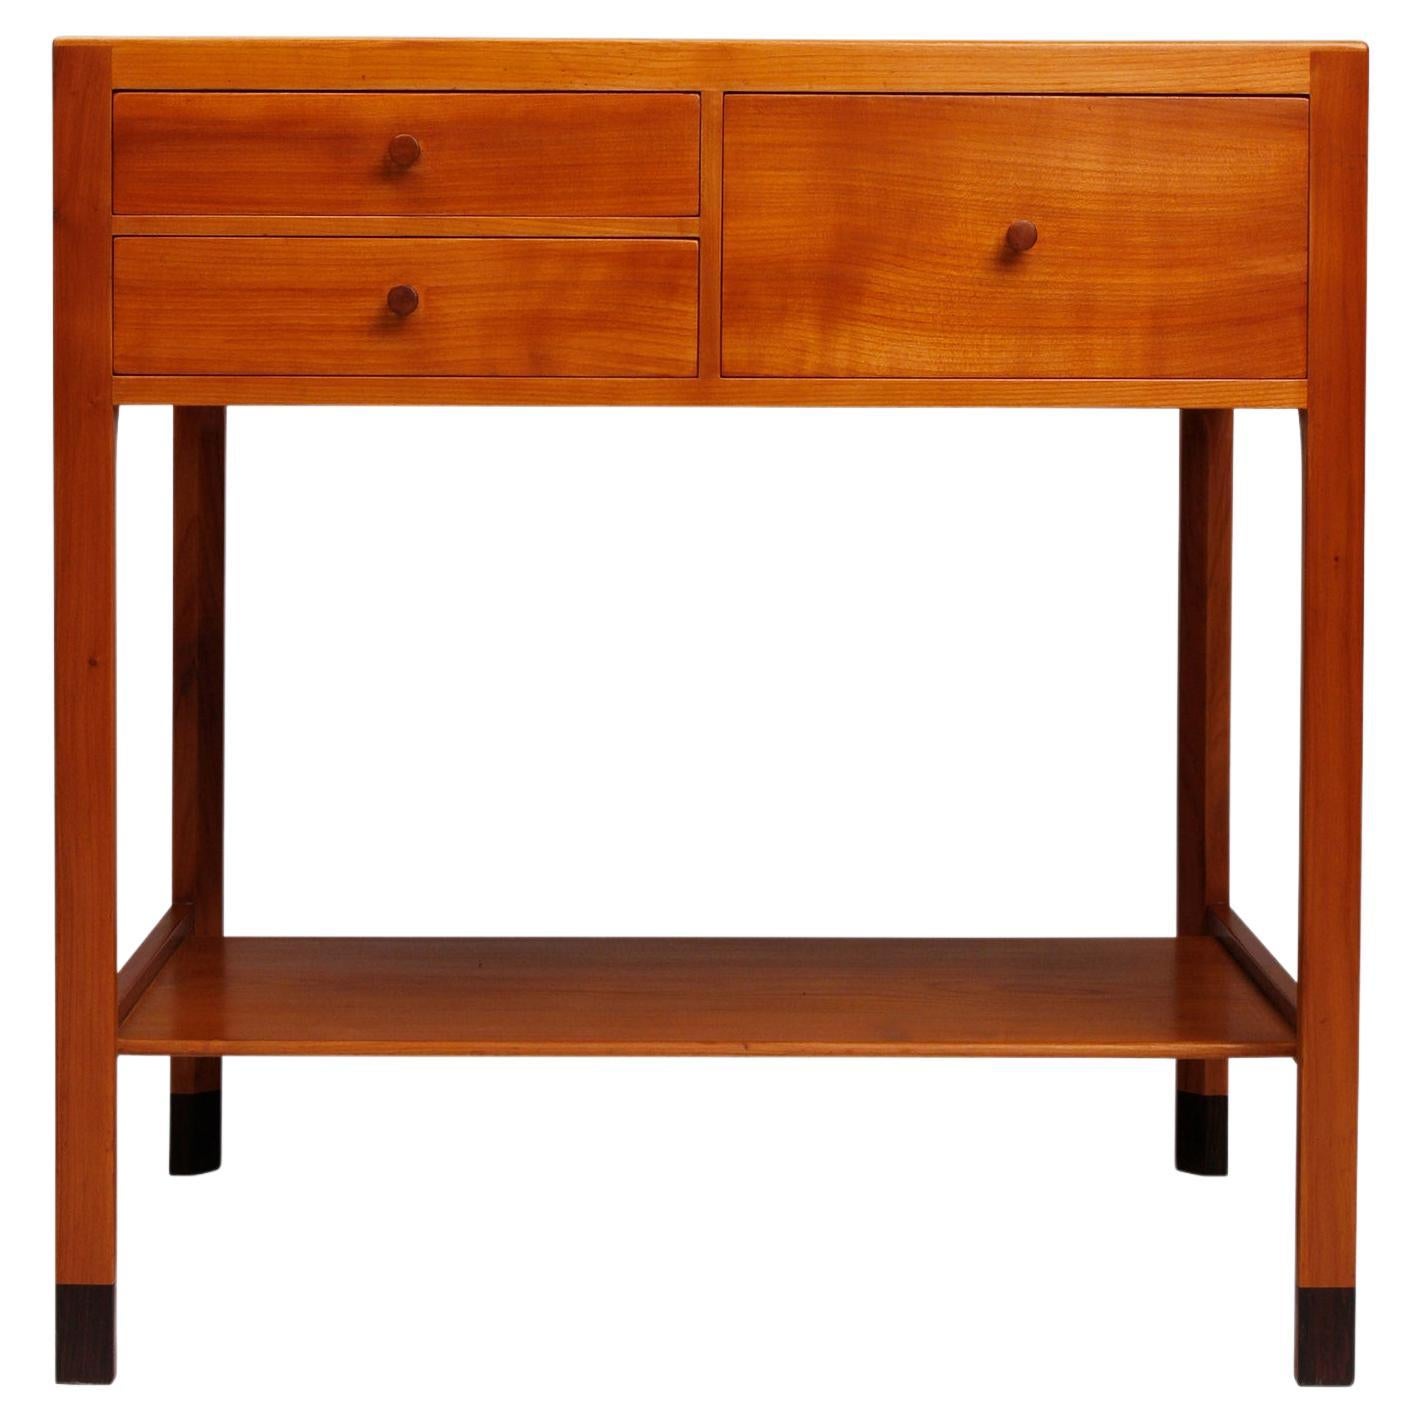 Danish modern cherry wood side table with drawers and shelf